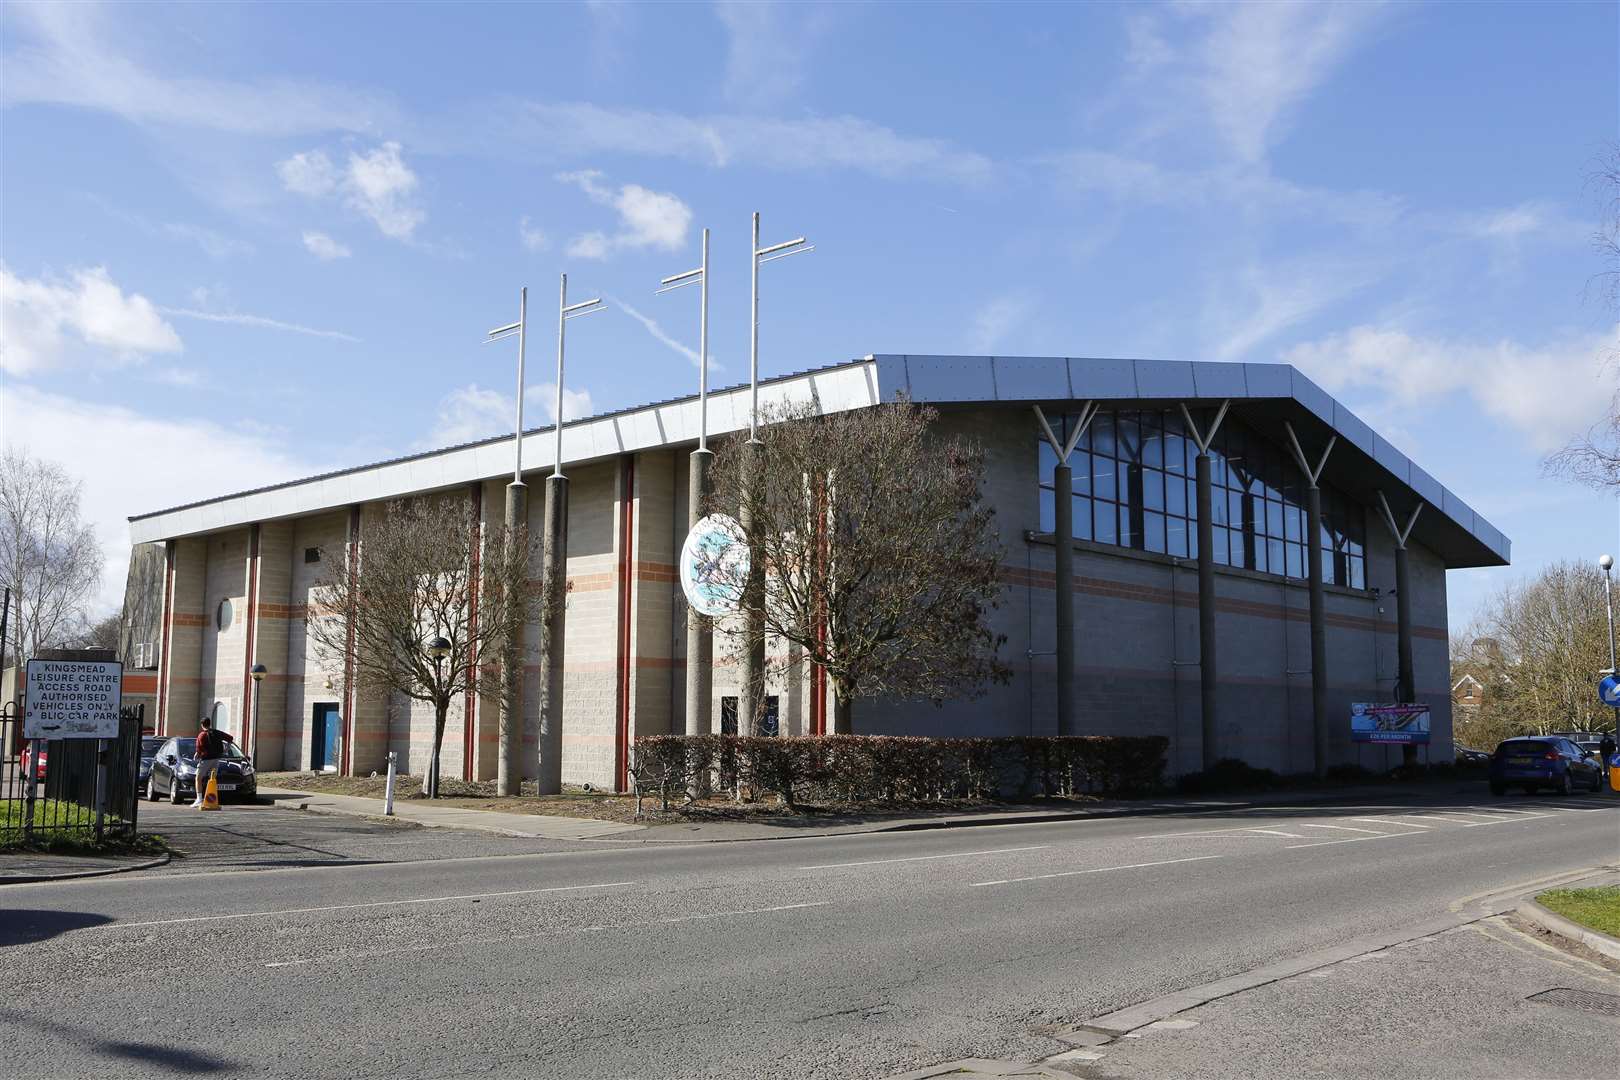 Kingsmead Leisure Center in Canterbury